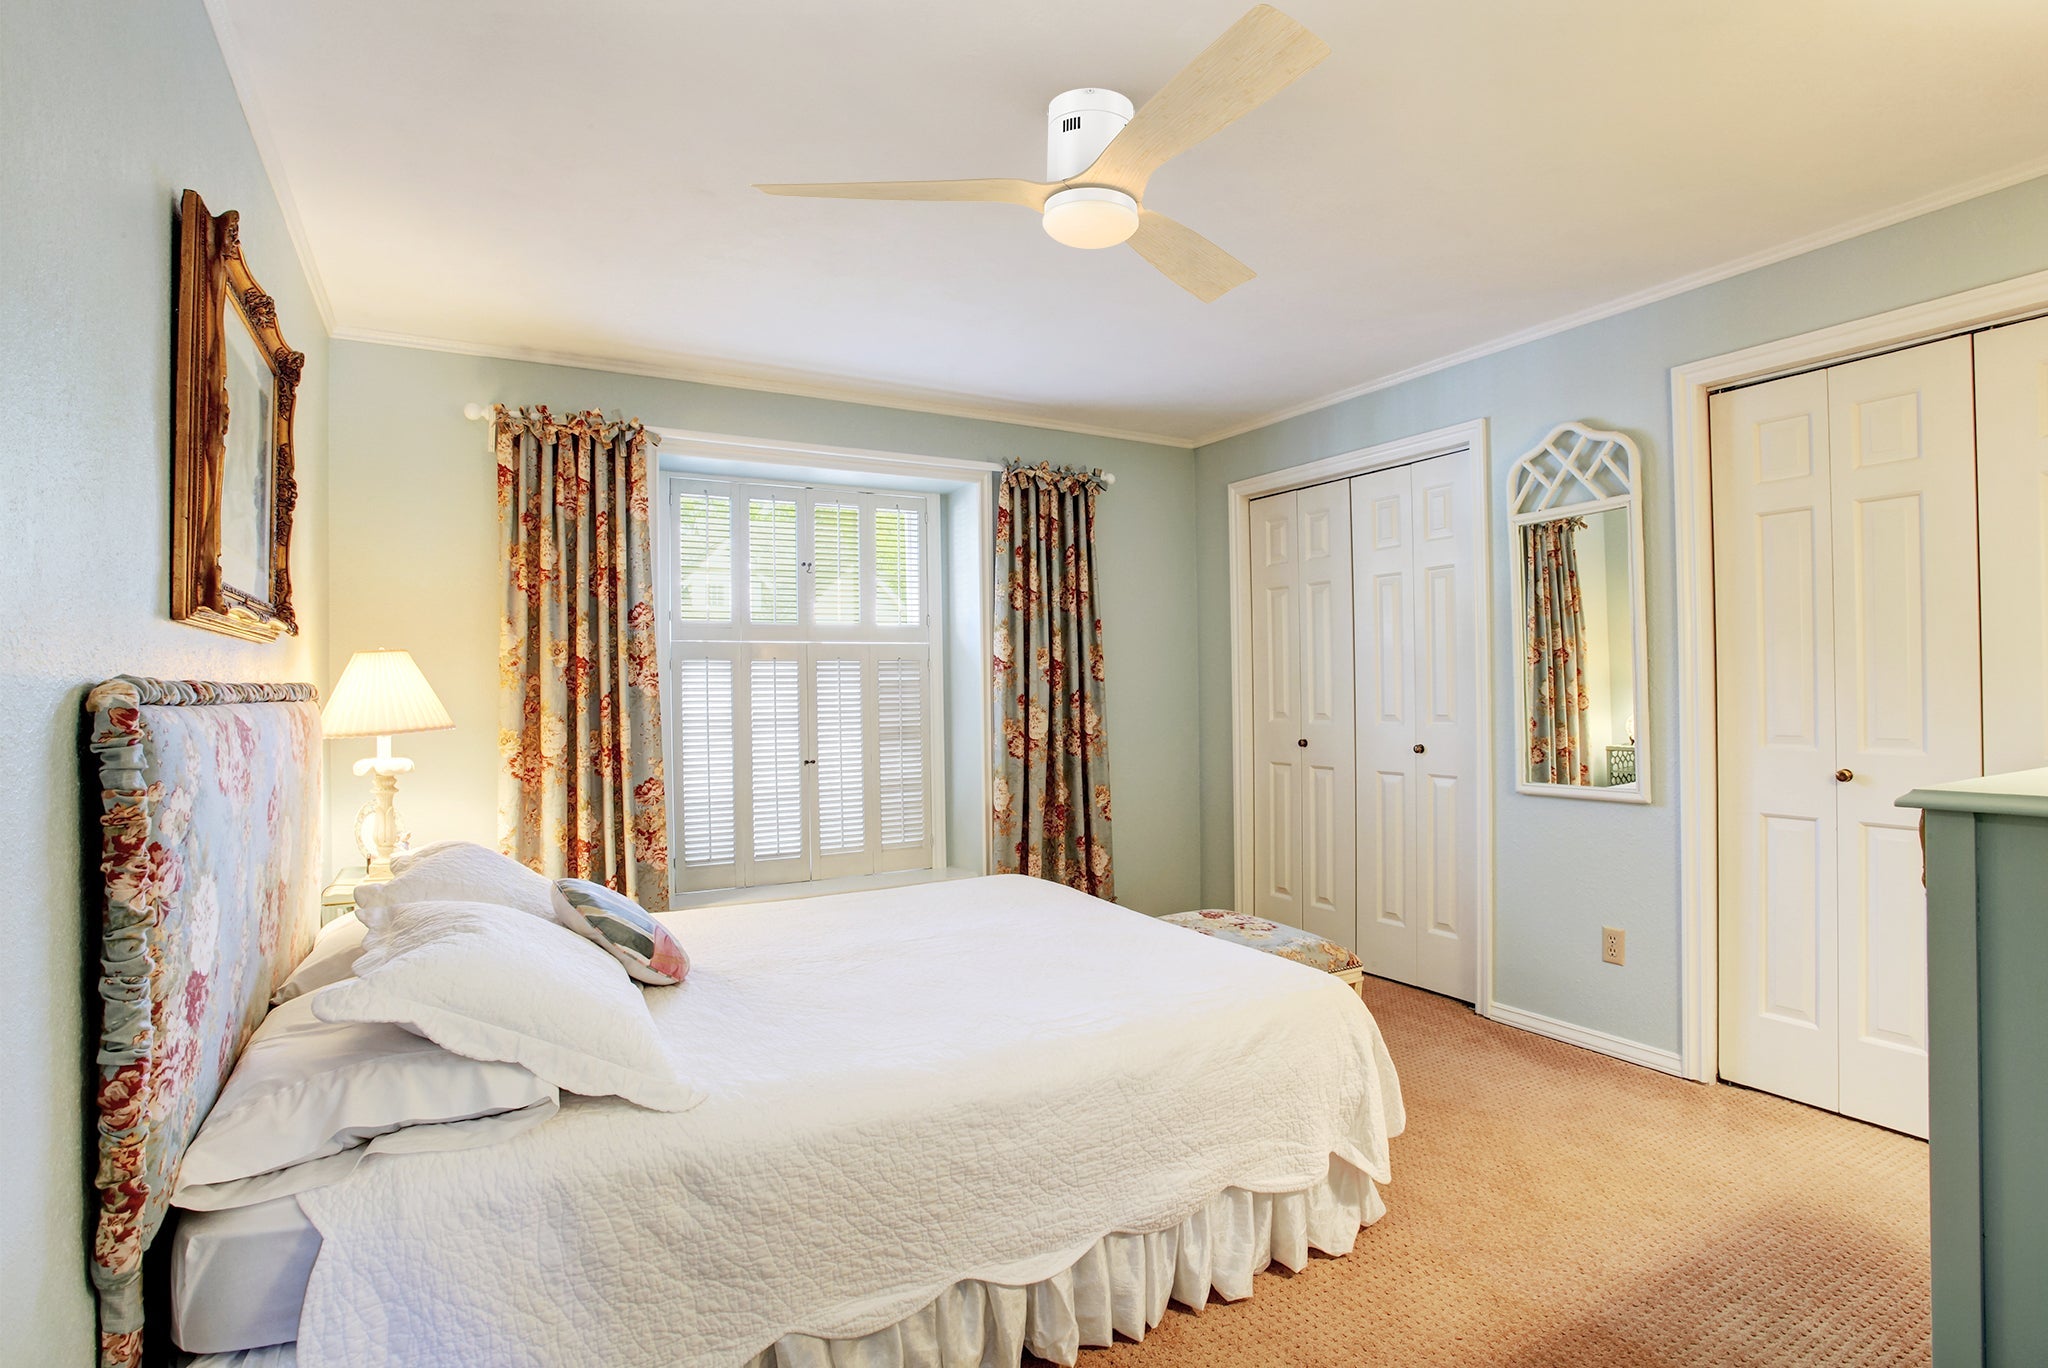 White low profile ceiling fan with wood tone designed blades was installed in bedroom